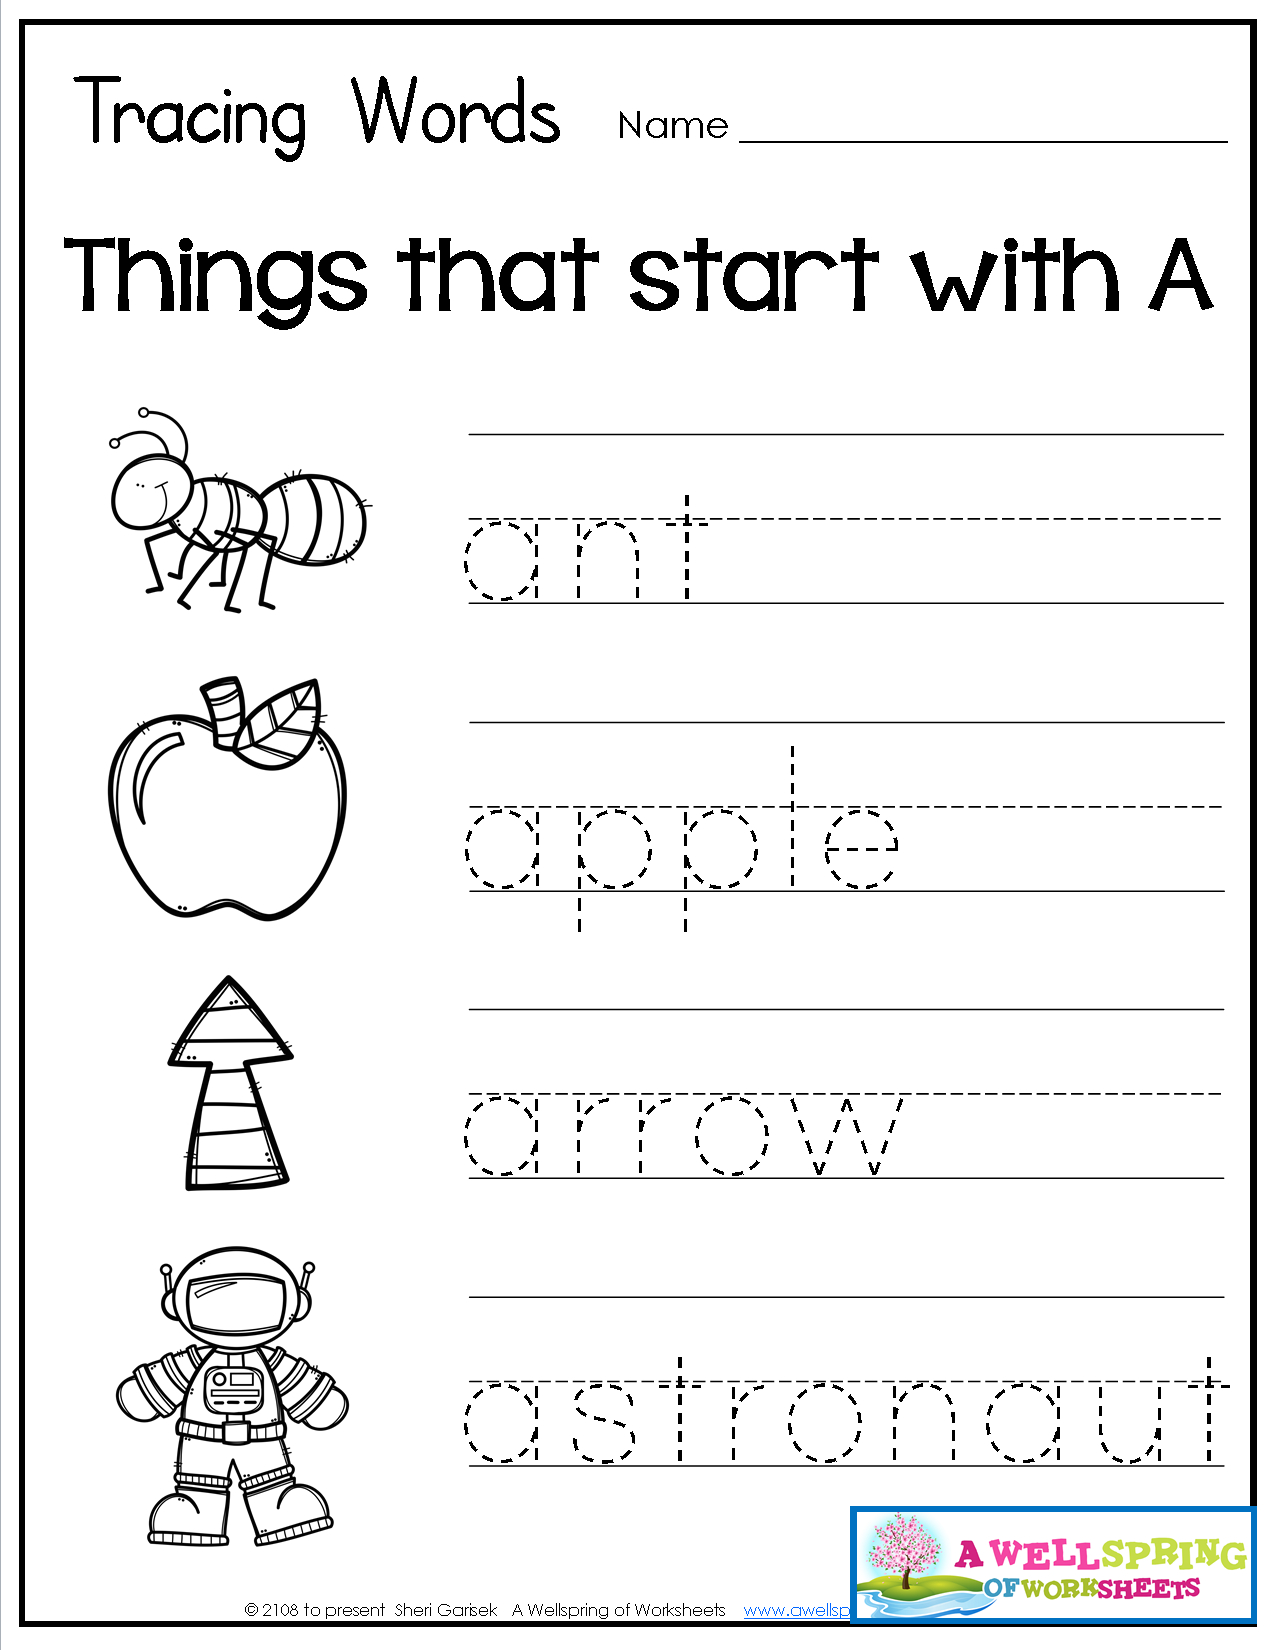 Tracing Words - Things That Start With A-Z | Teaching throughout Tracing Letters And Words Worksheets